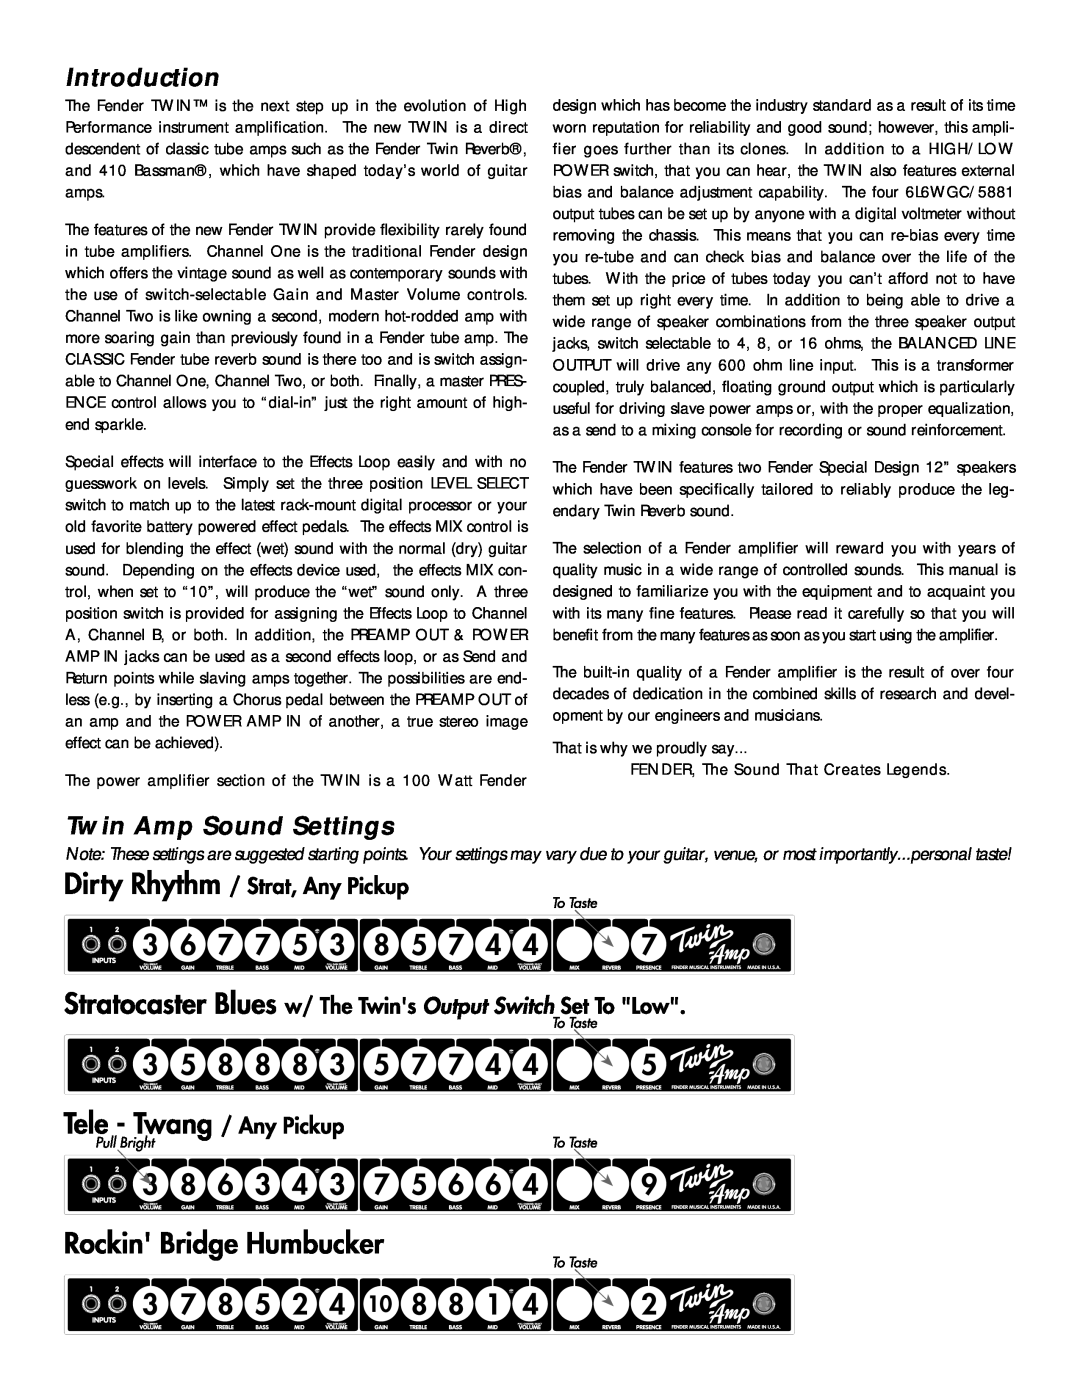 Fender Twin Amplifier owner manual Introduction, Twin Amp Sound Settings 